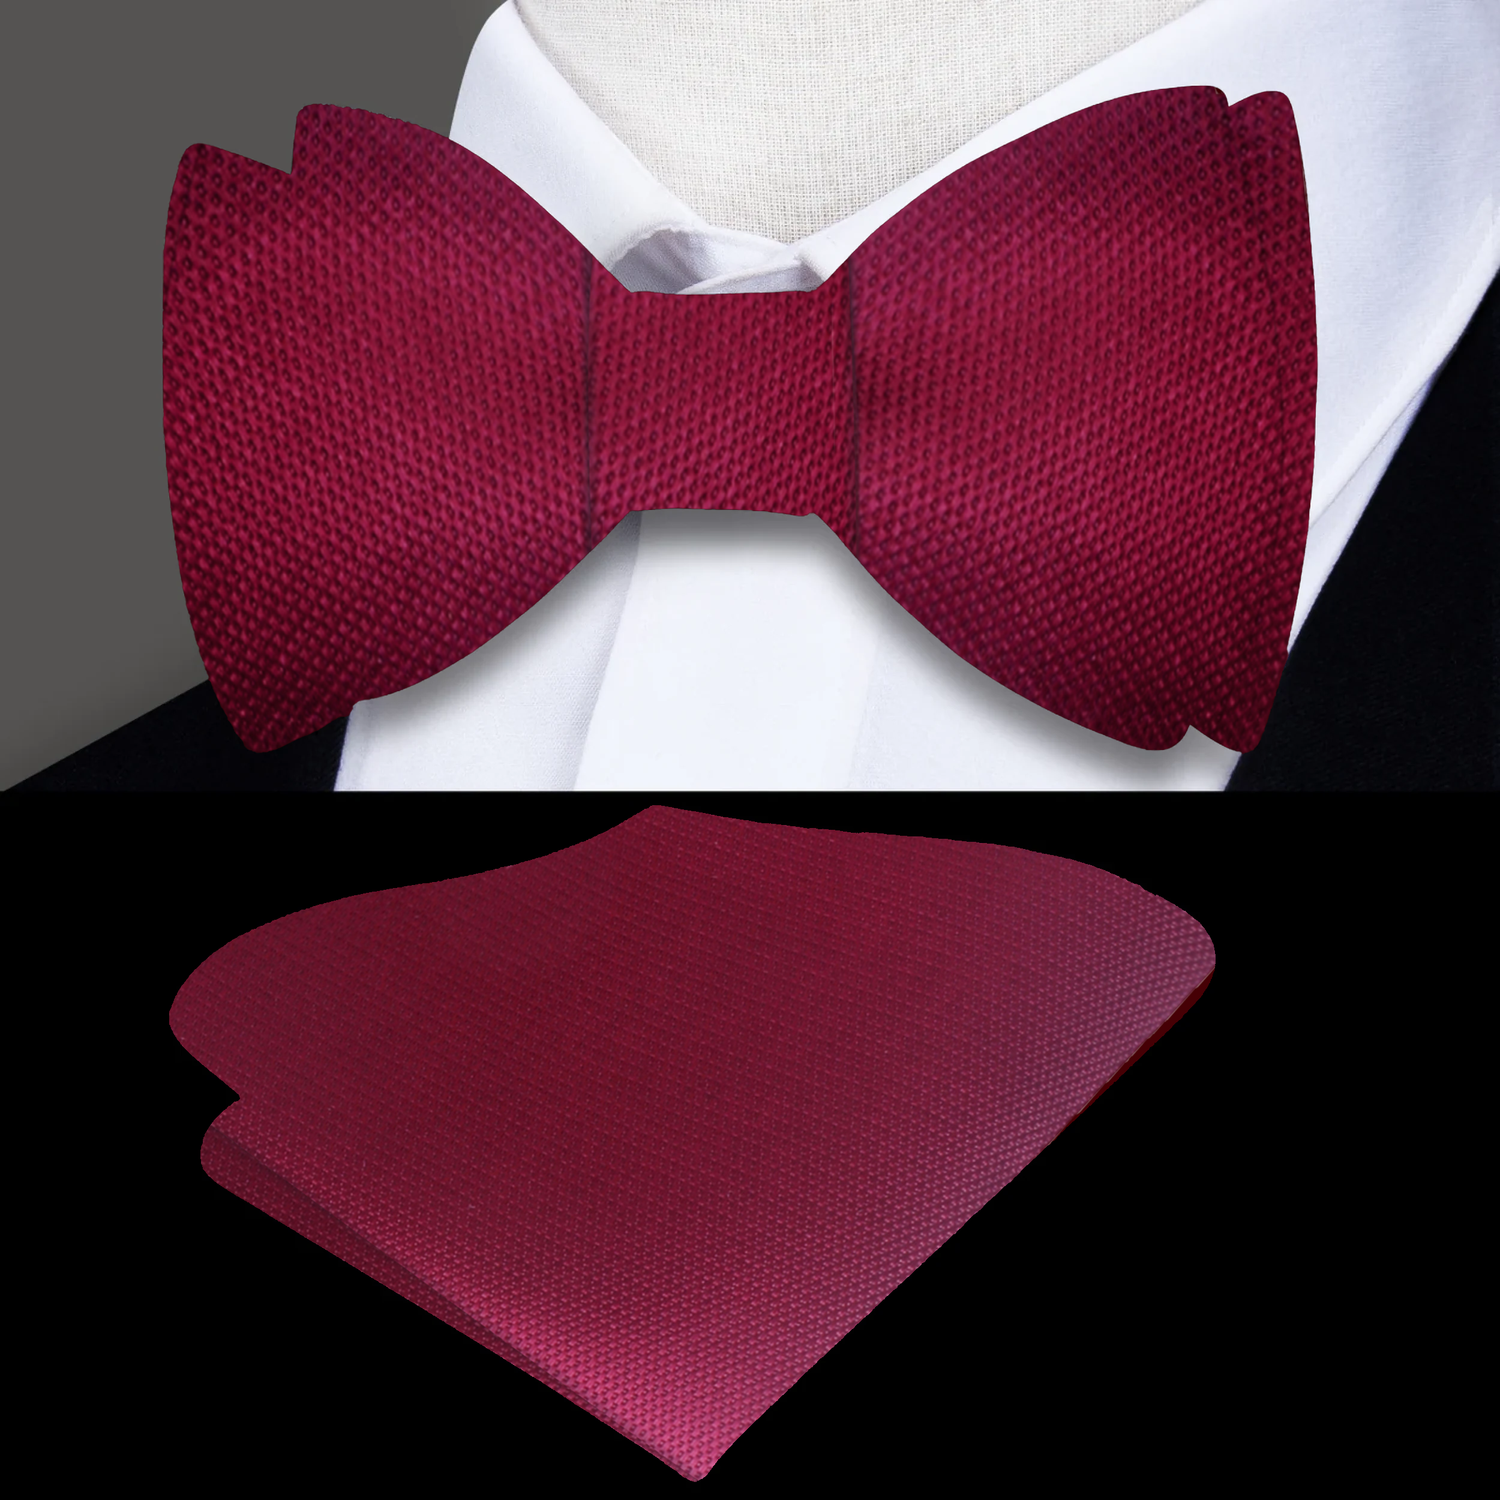 Main: A Solid Burgundy With Small Check Texture Pattern Silk Self Tie Bow Tie With Matching Pocket Square